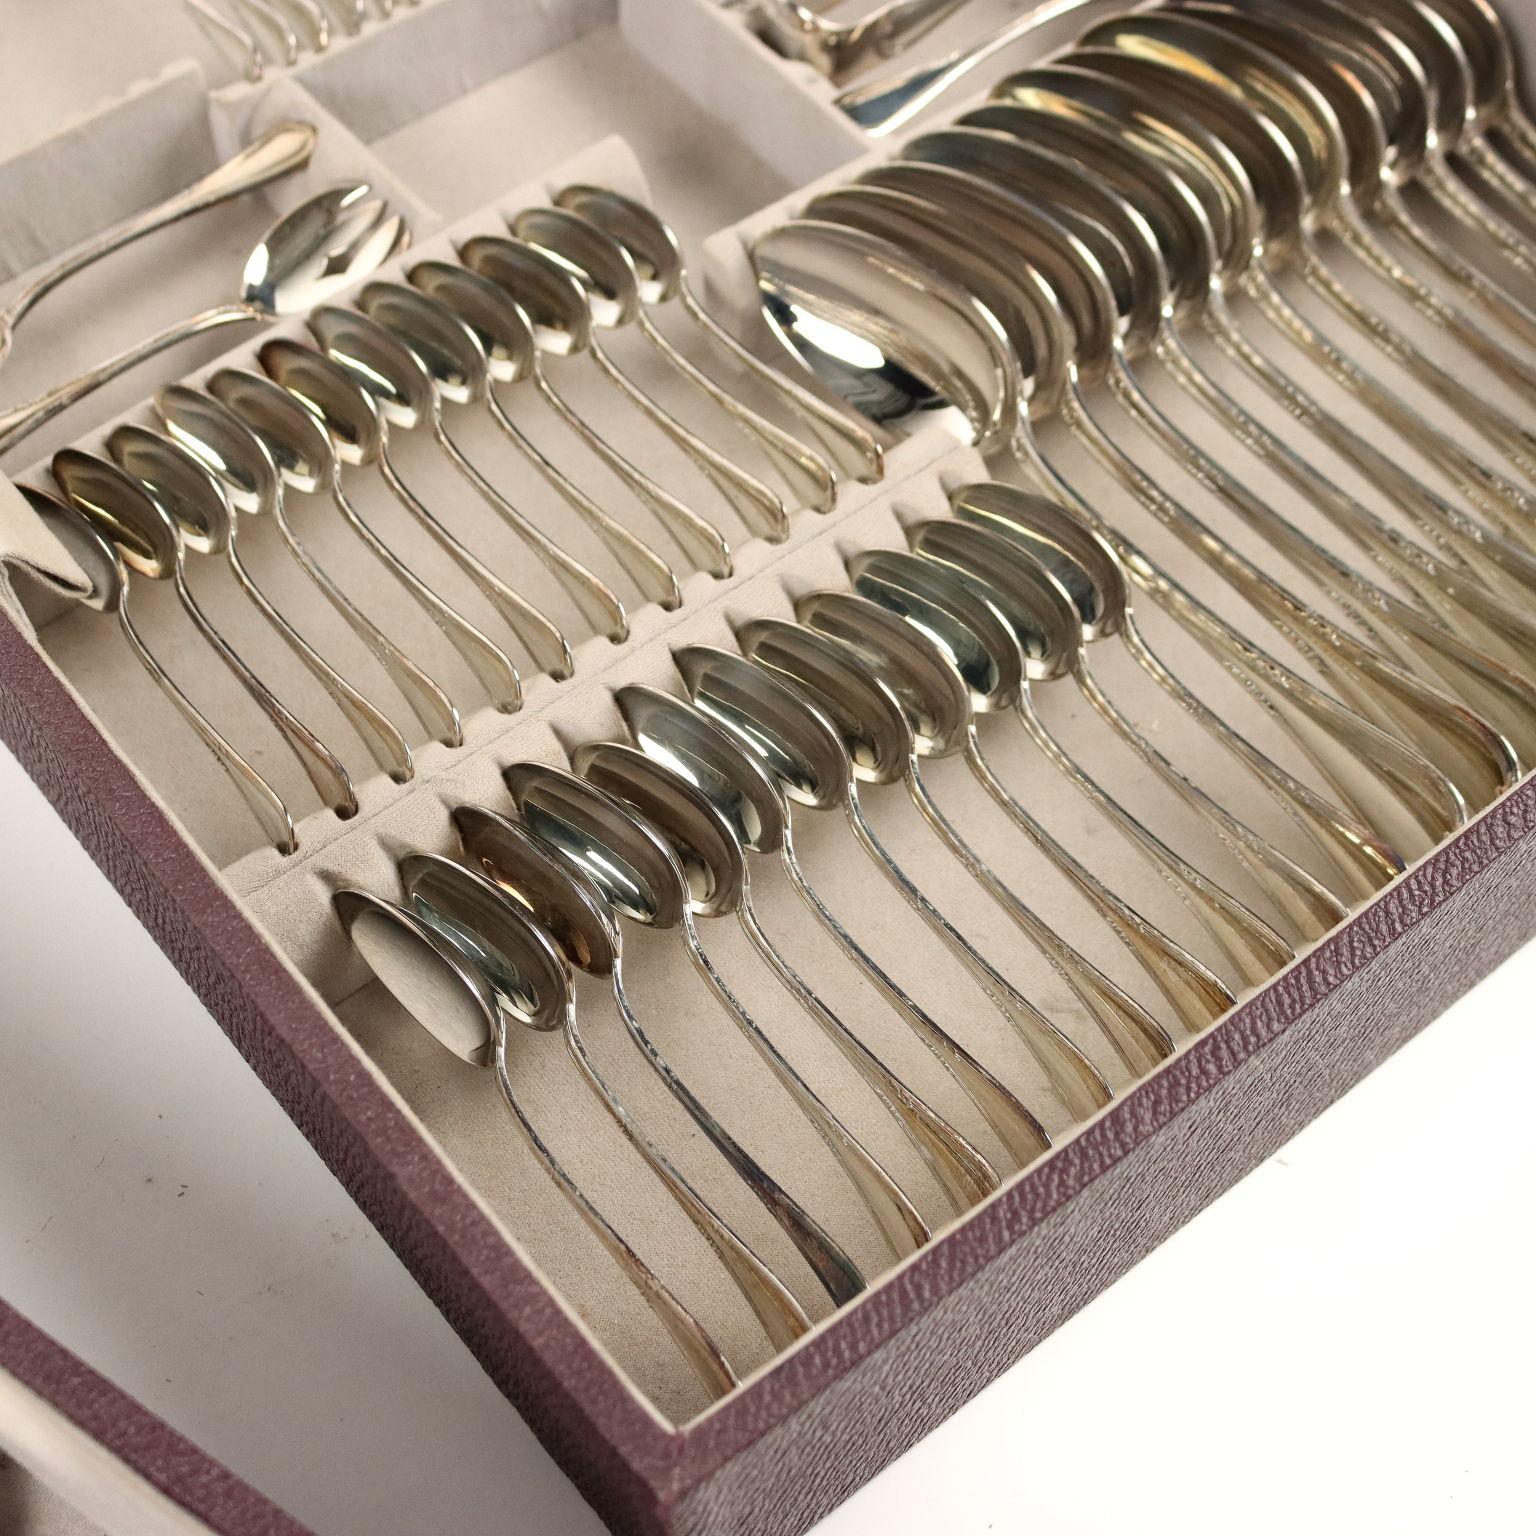 Silver cutlery service for twelve people consisting of 15 serving cutlery, 24 knives, 24 forks, 12 spoons, 12 fruit knives, 12 fruit forks, 12 fish knives, 12 fish forks, 12 tea spoons, 12 coffee spoons, 12 dessert knives, 12 dessert forks. Hallmark